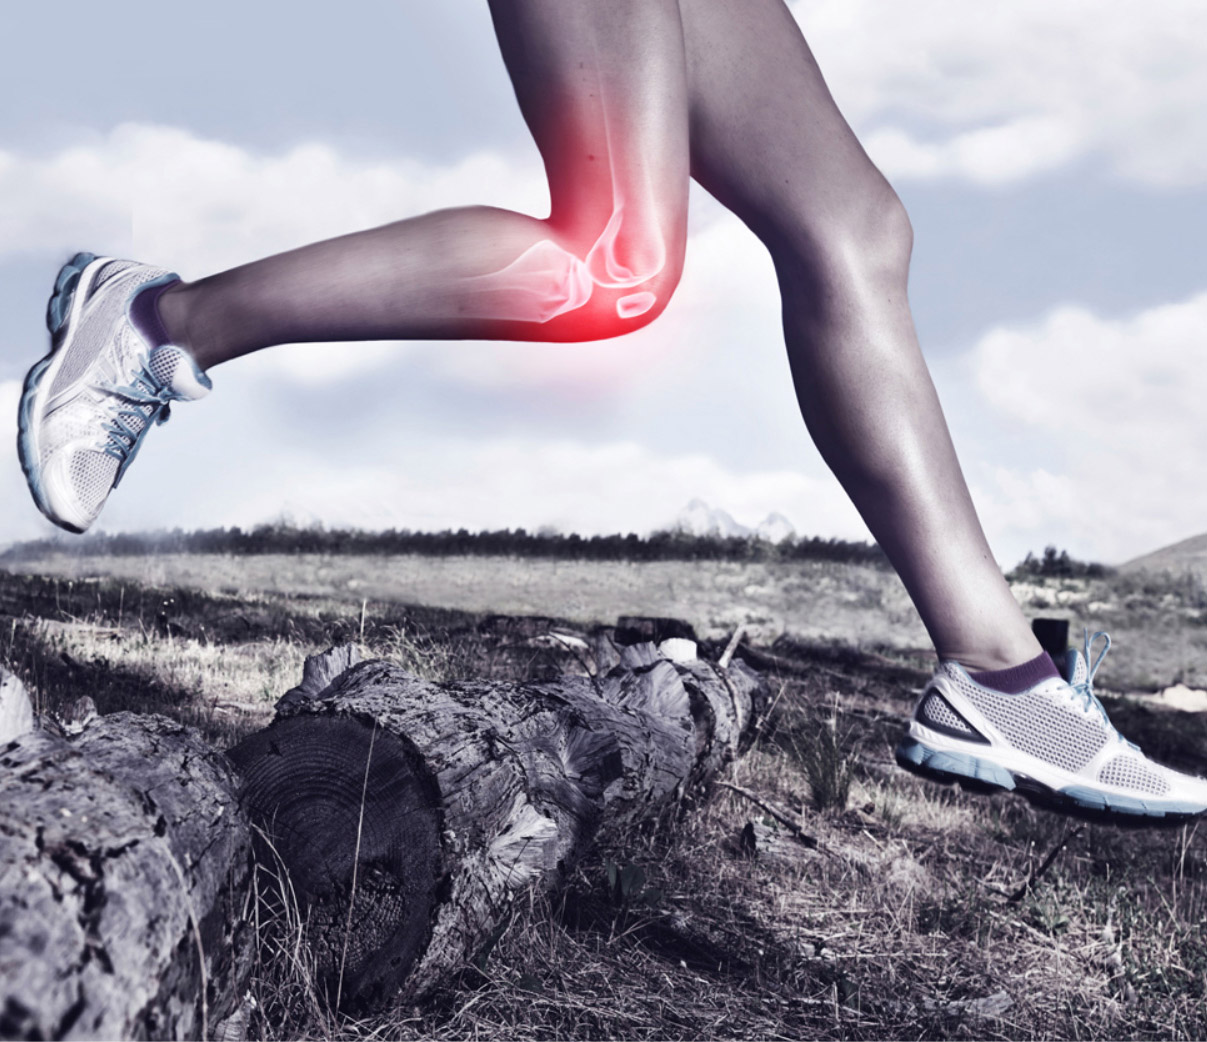 A runner’s legs are pictured with a superimposed skeletal image of the knee joint highlighted in red. The letters PTX overlay the image to represent the physical therapy treatment services offered.